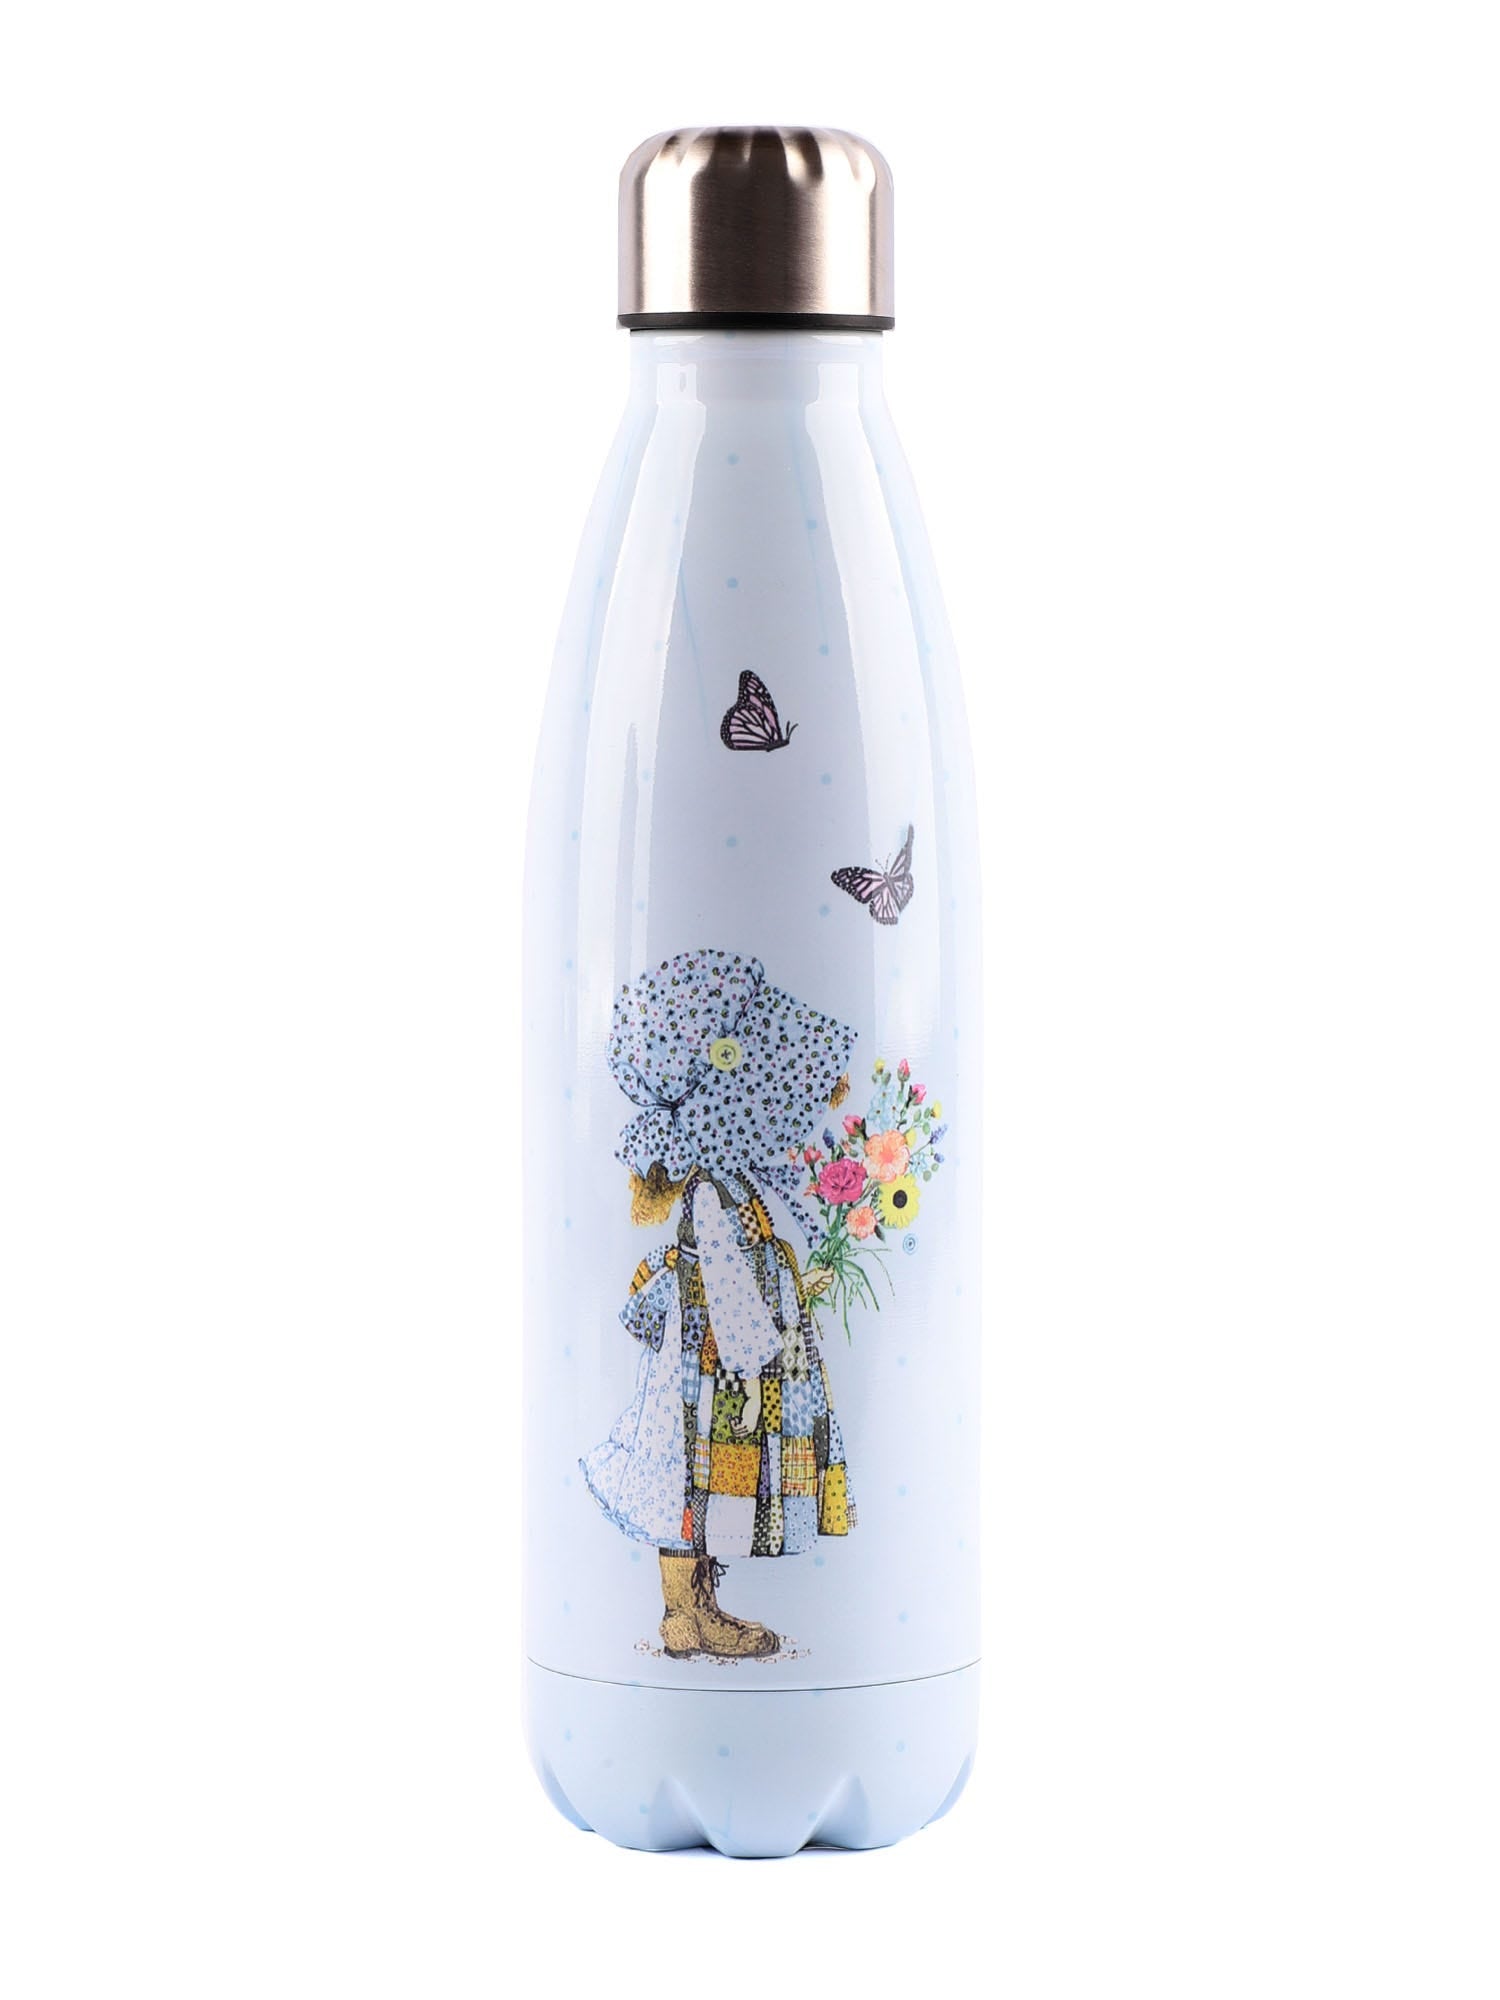 Clintons - Gifts Holly Hobbie Hydration Bottle